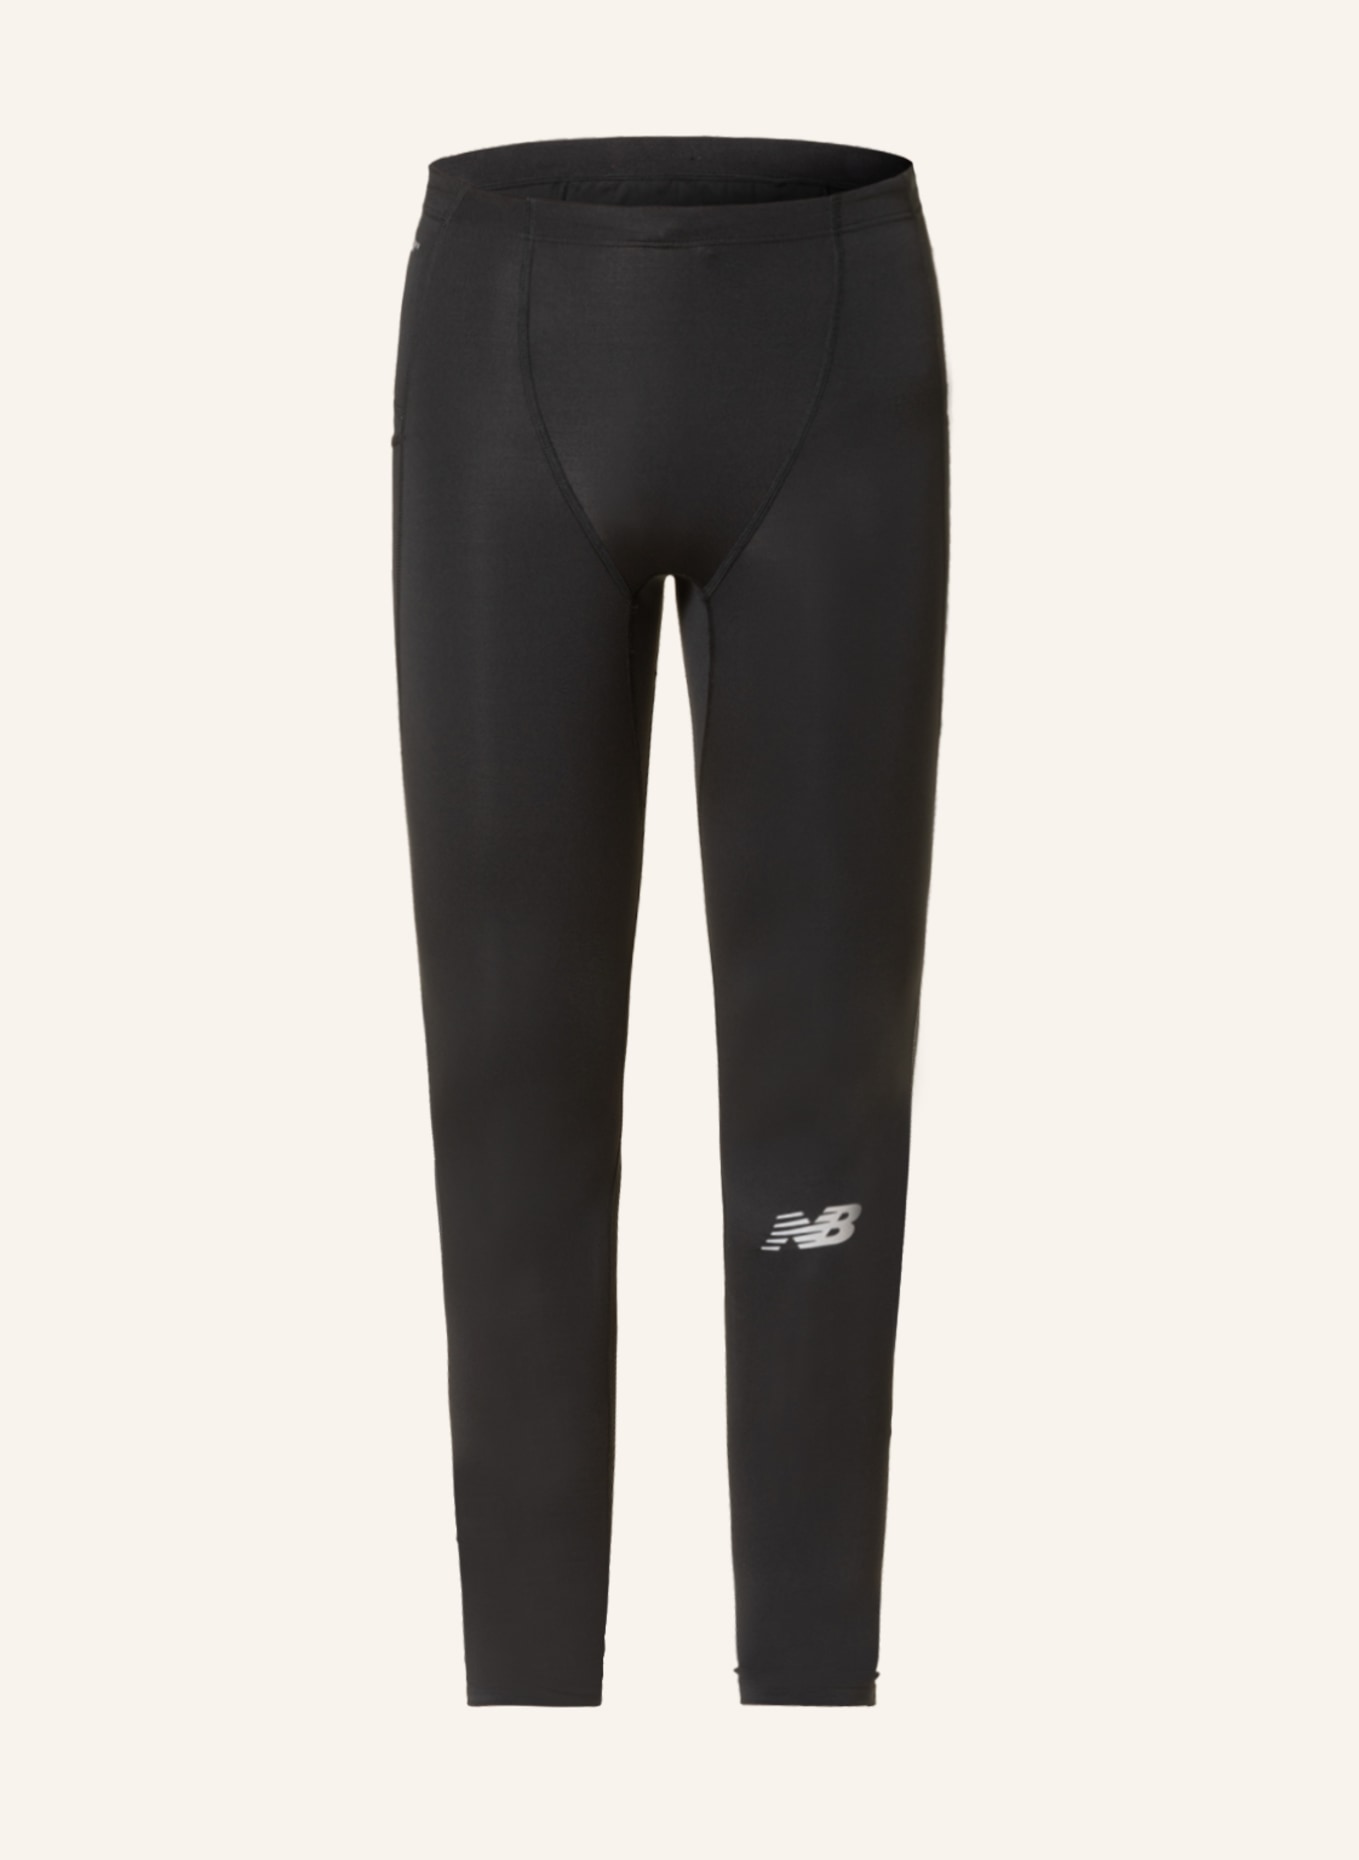 GORE Wear R3 Partial Gore Windstopper Tights - Running trousers Women's, Buy online